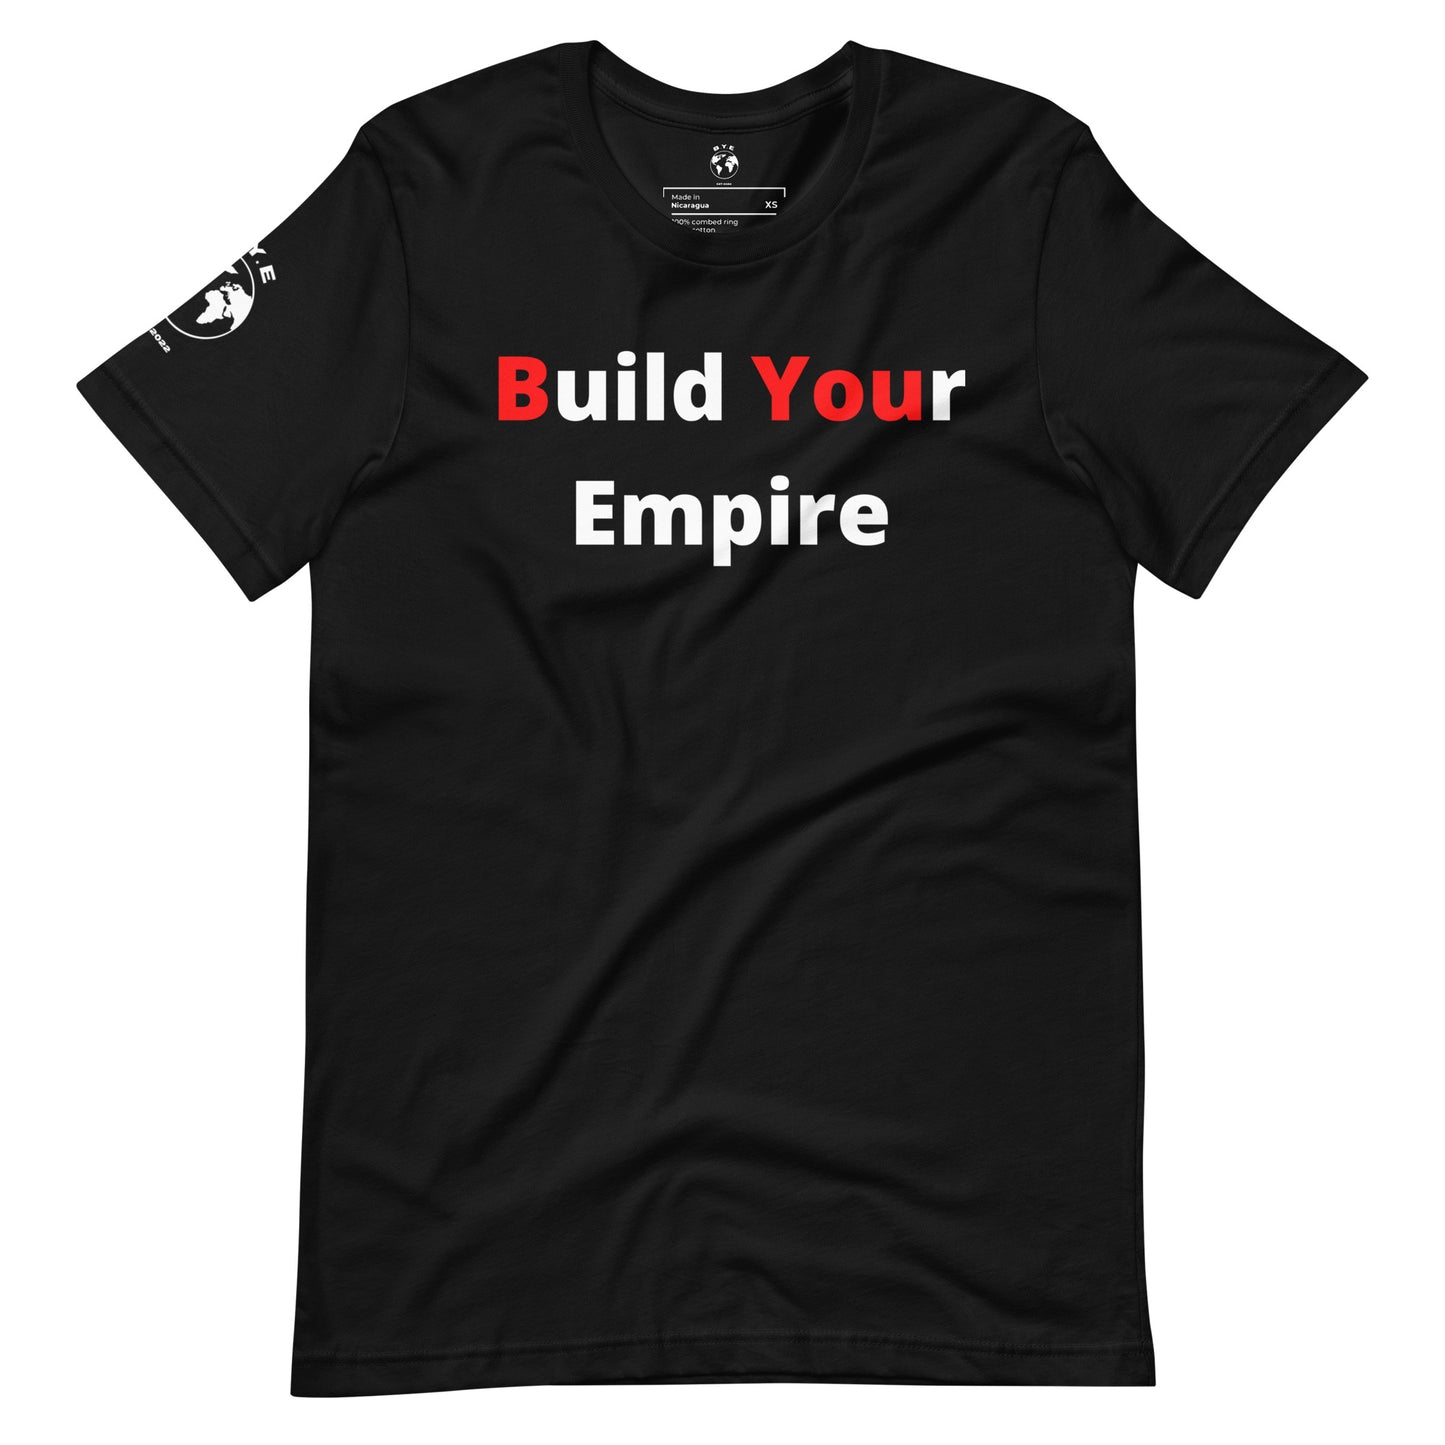 "B YOU" Tee - Black, White, And Red